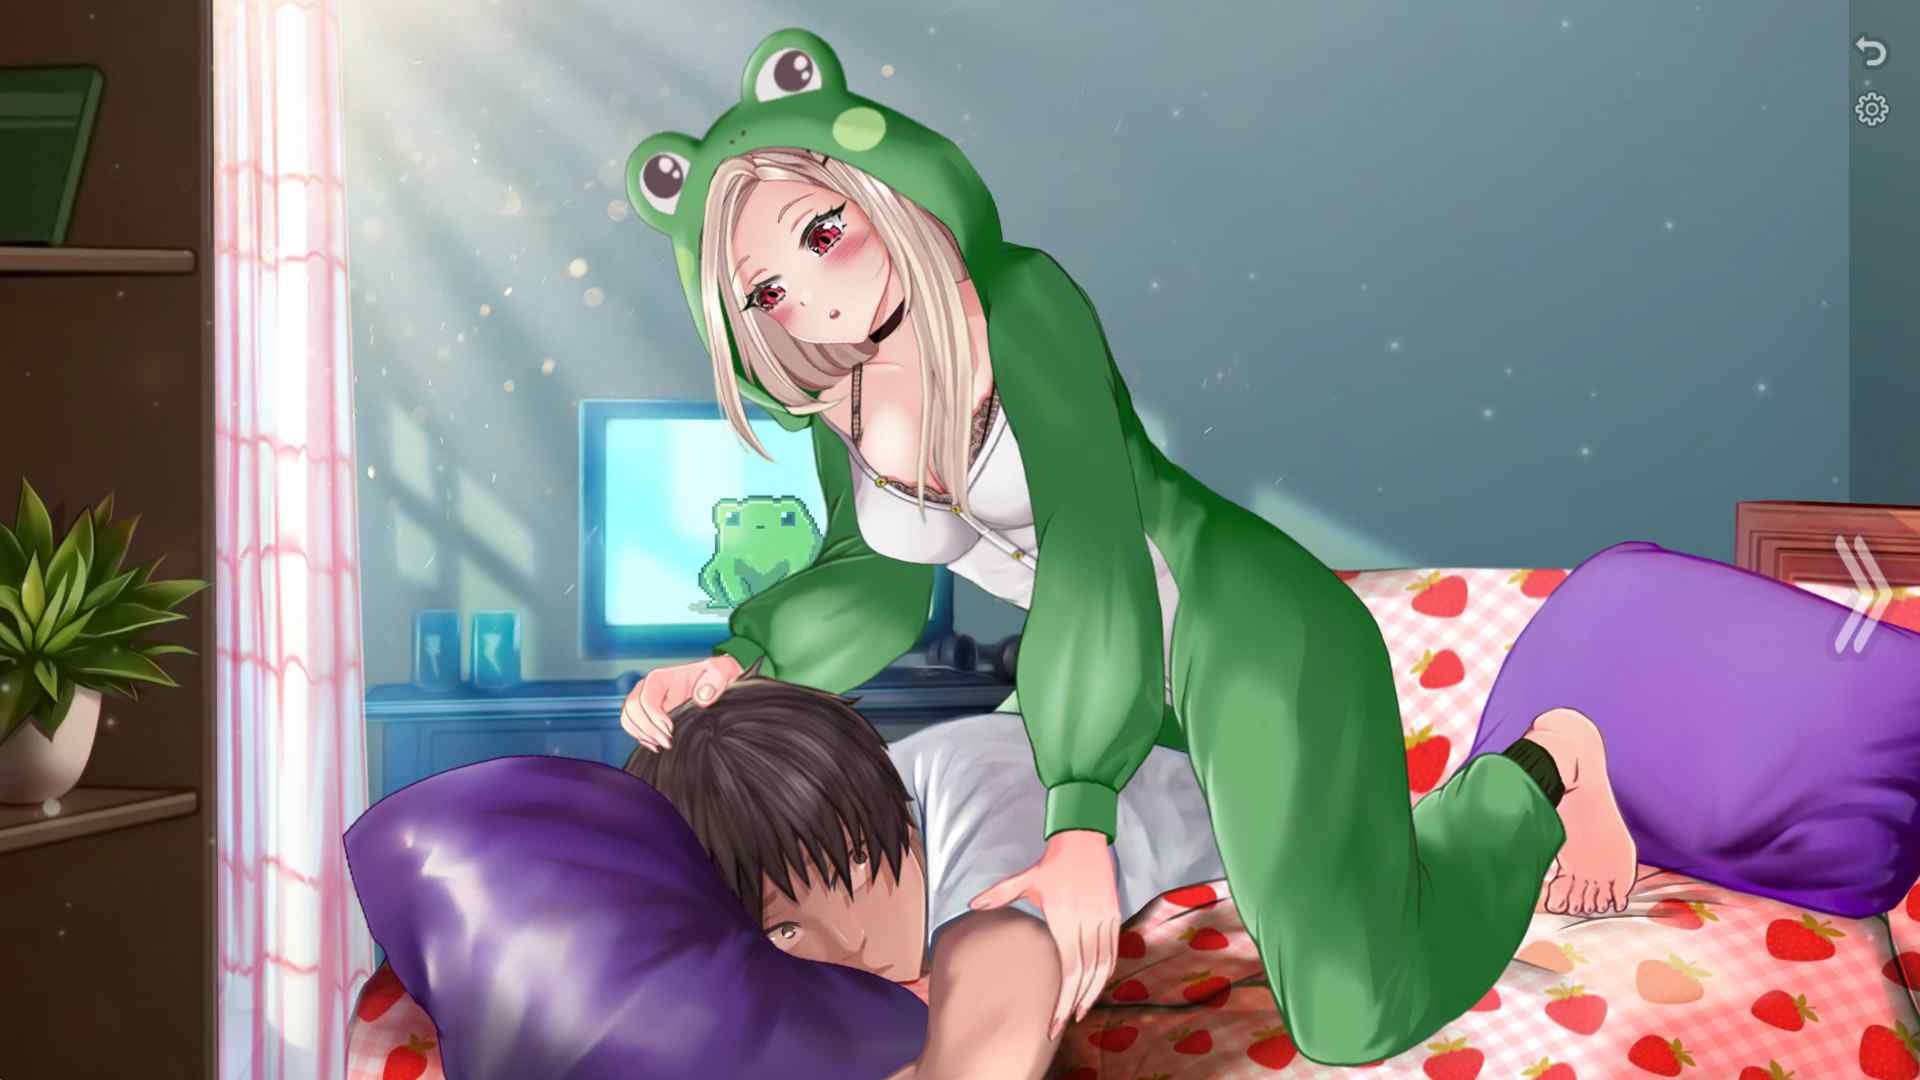 What if Your Girl Was a Frog?